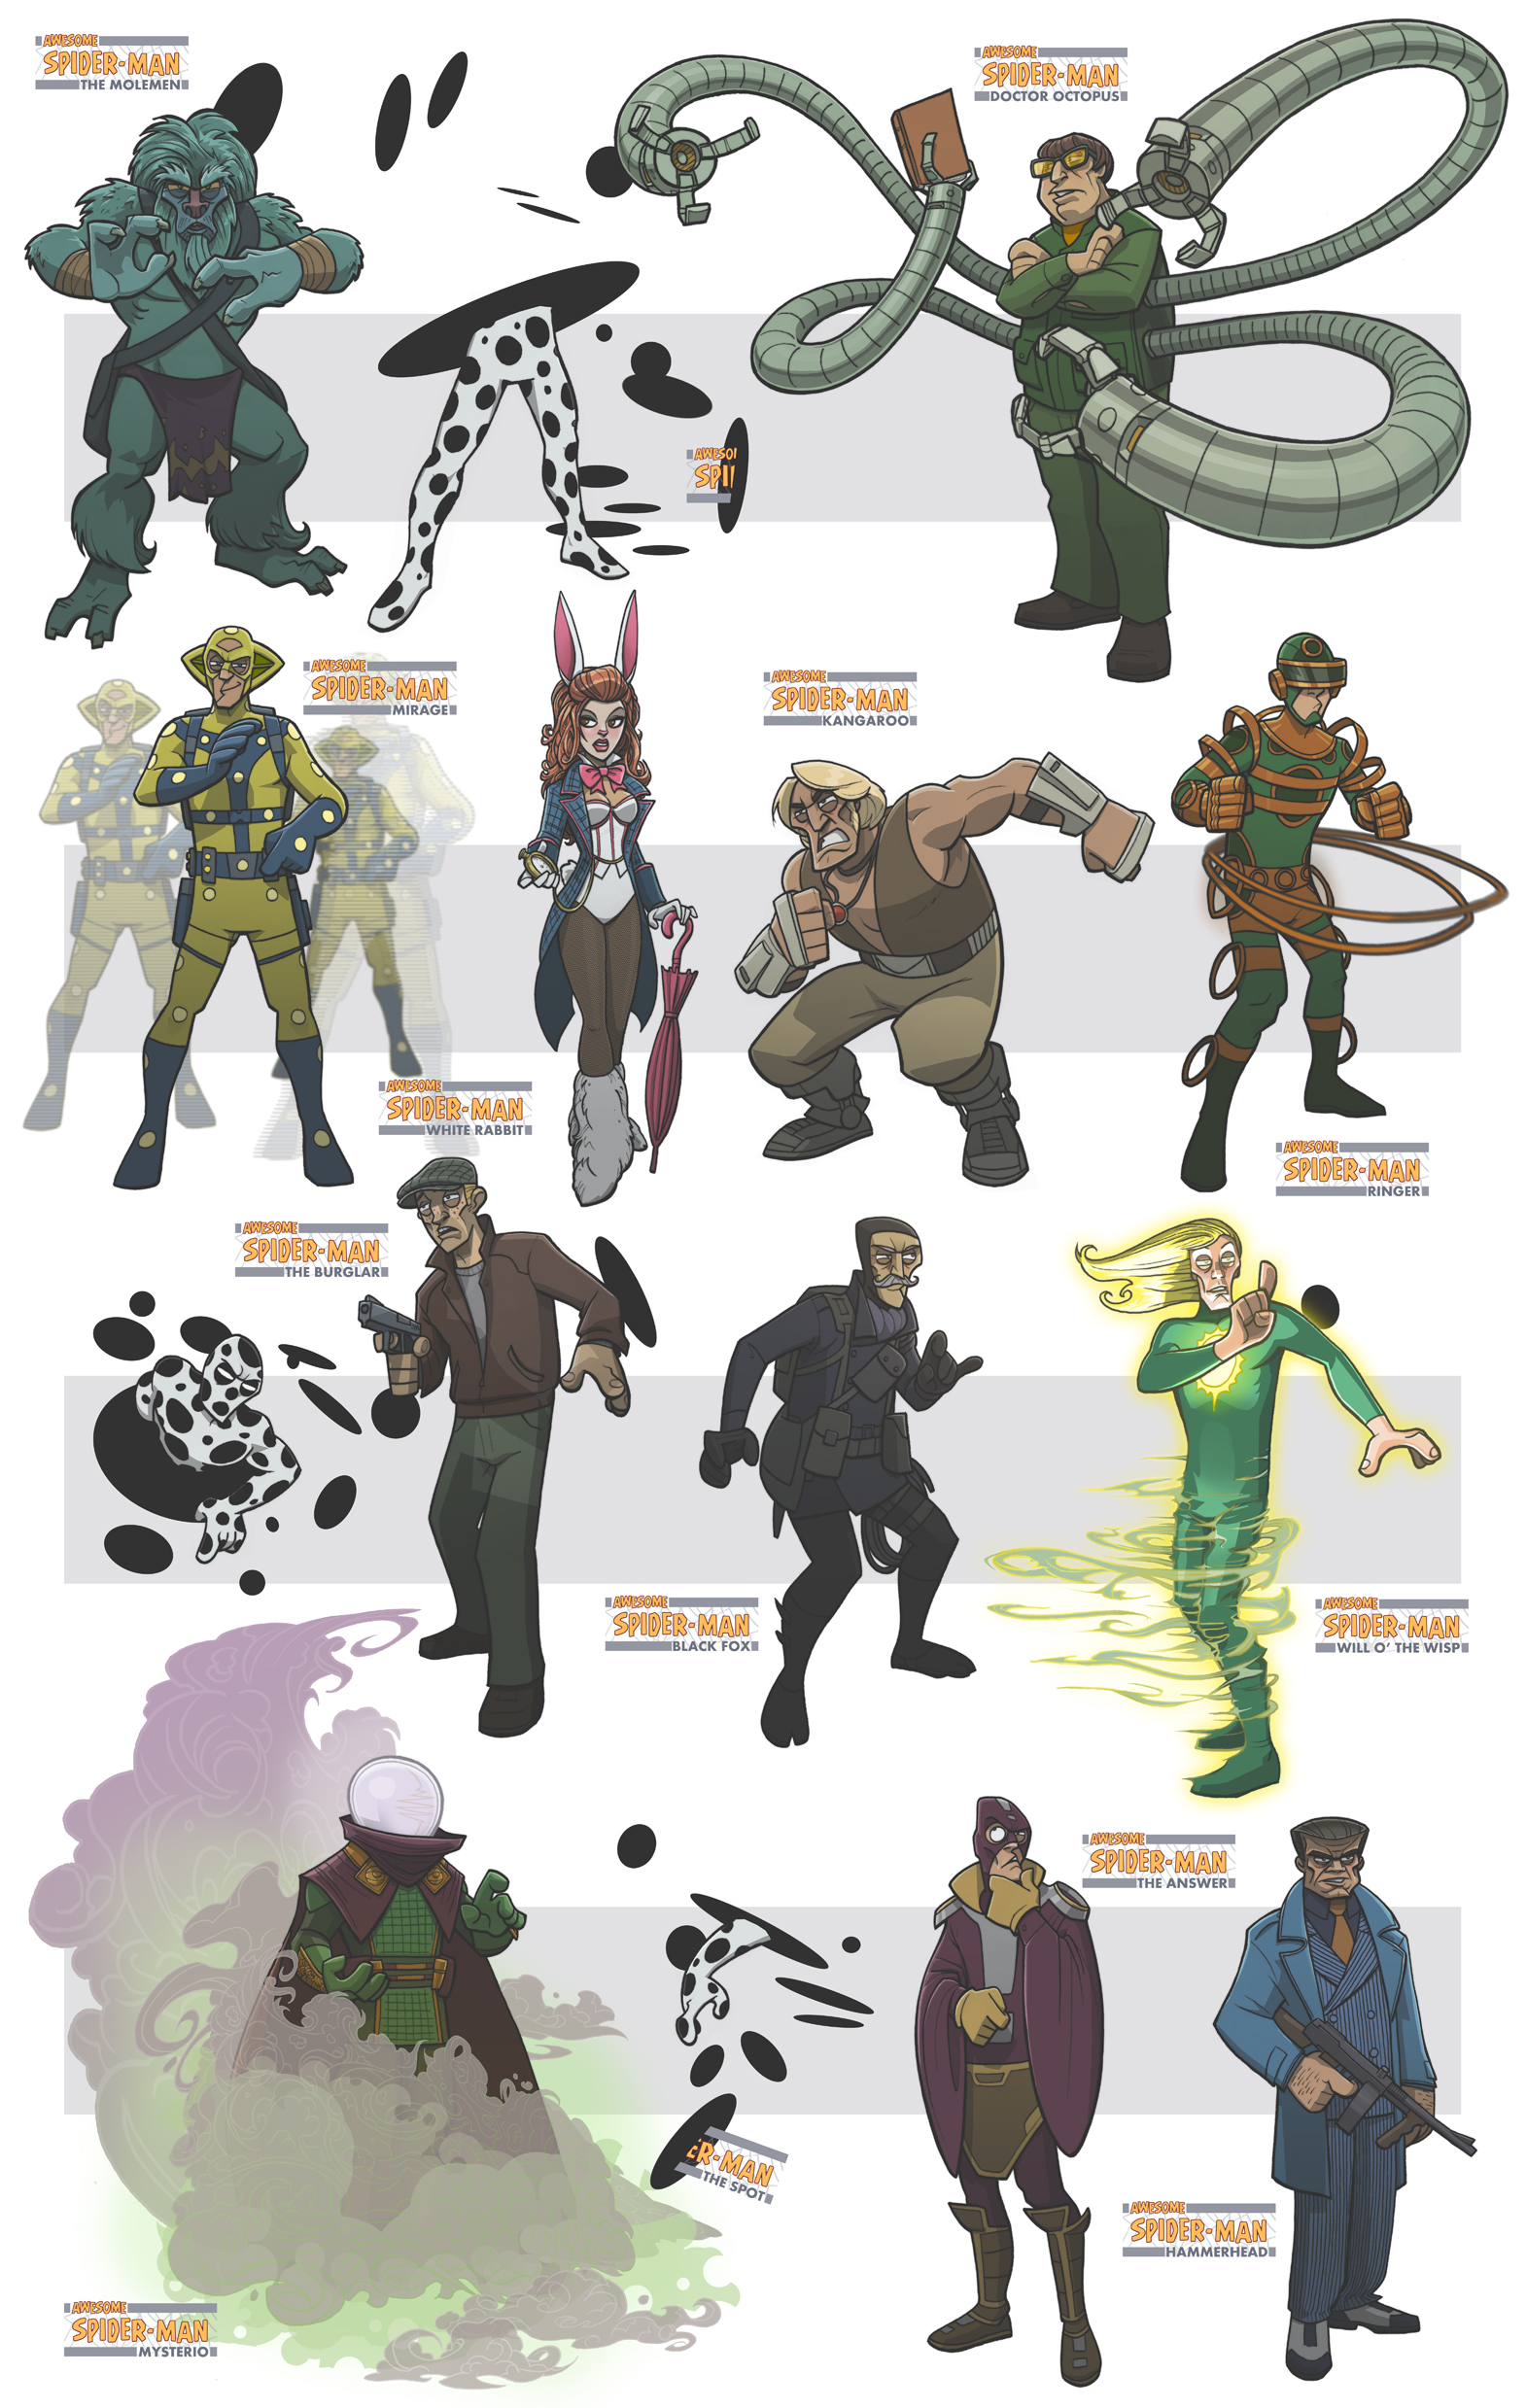 awesome spiderman villains IV by jimmymcwicked on DeviantArt